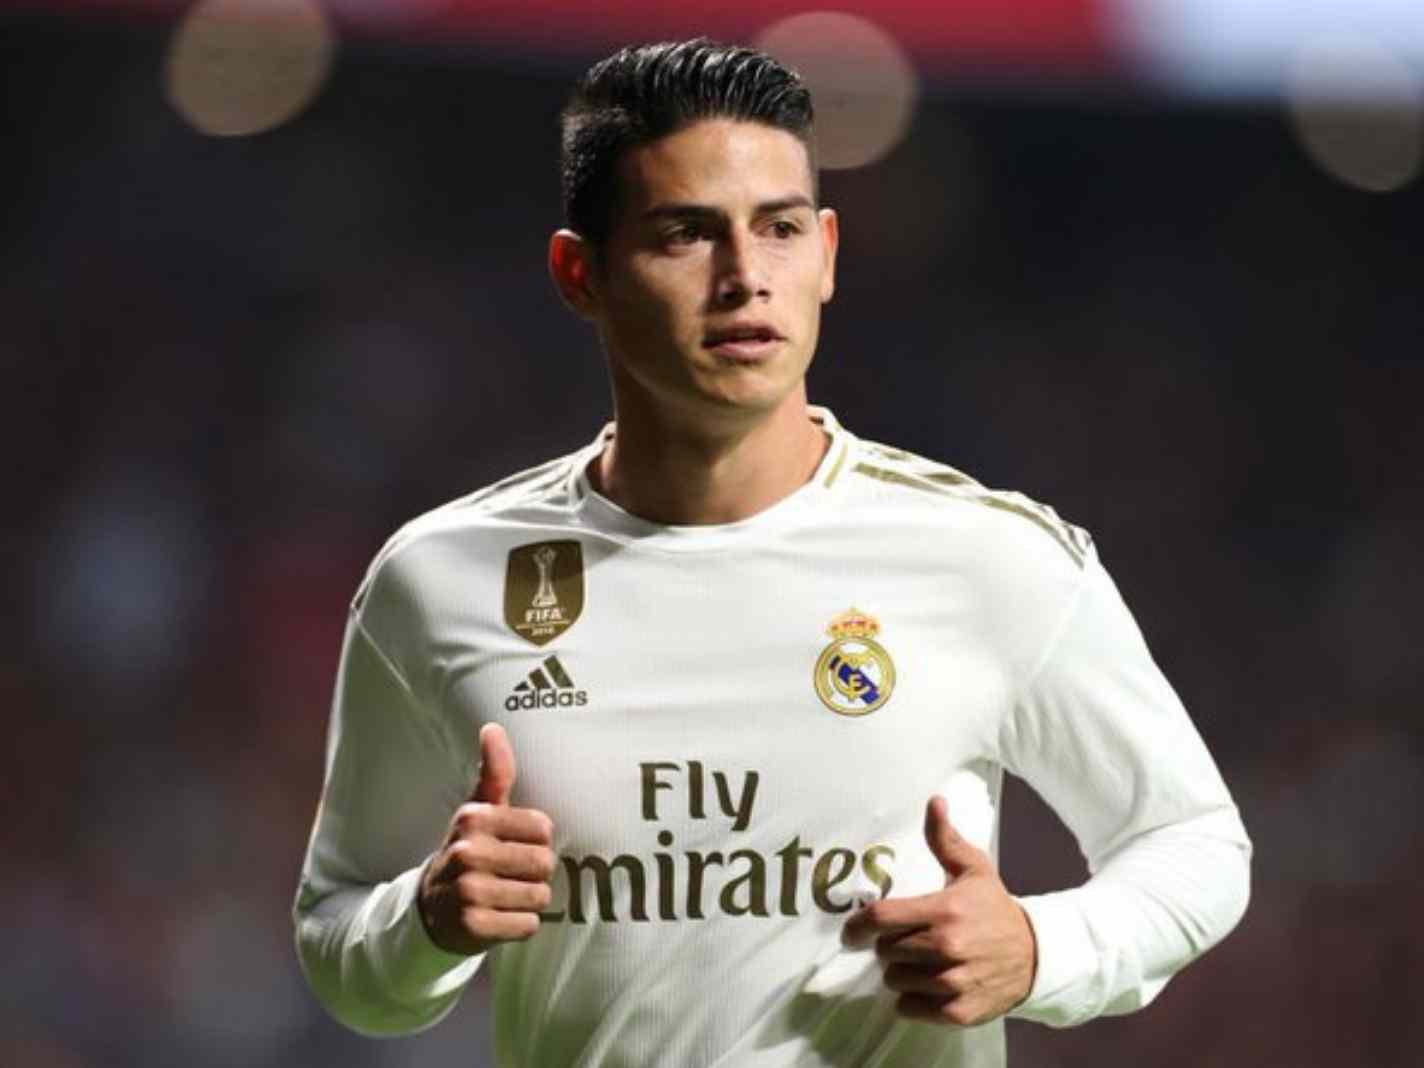 In this image - James Rodriguez during his Real Madrid days.